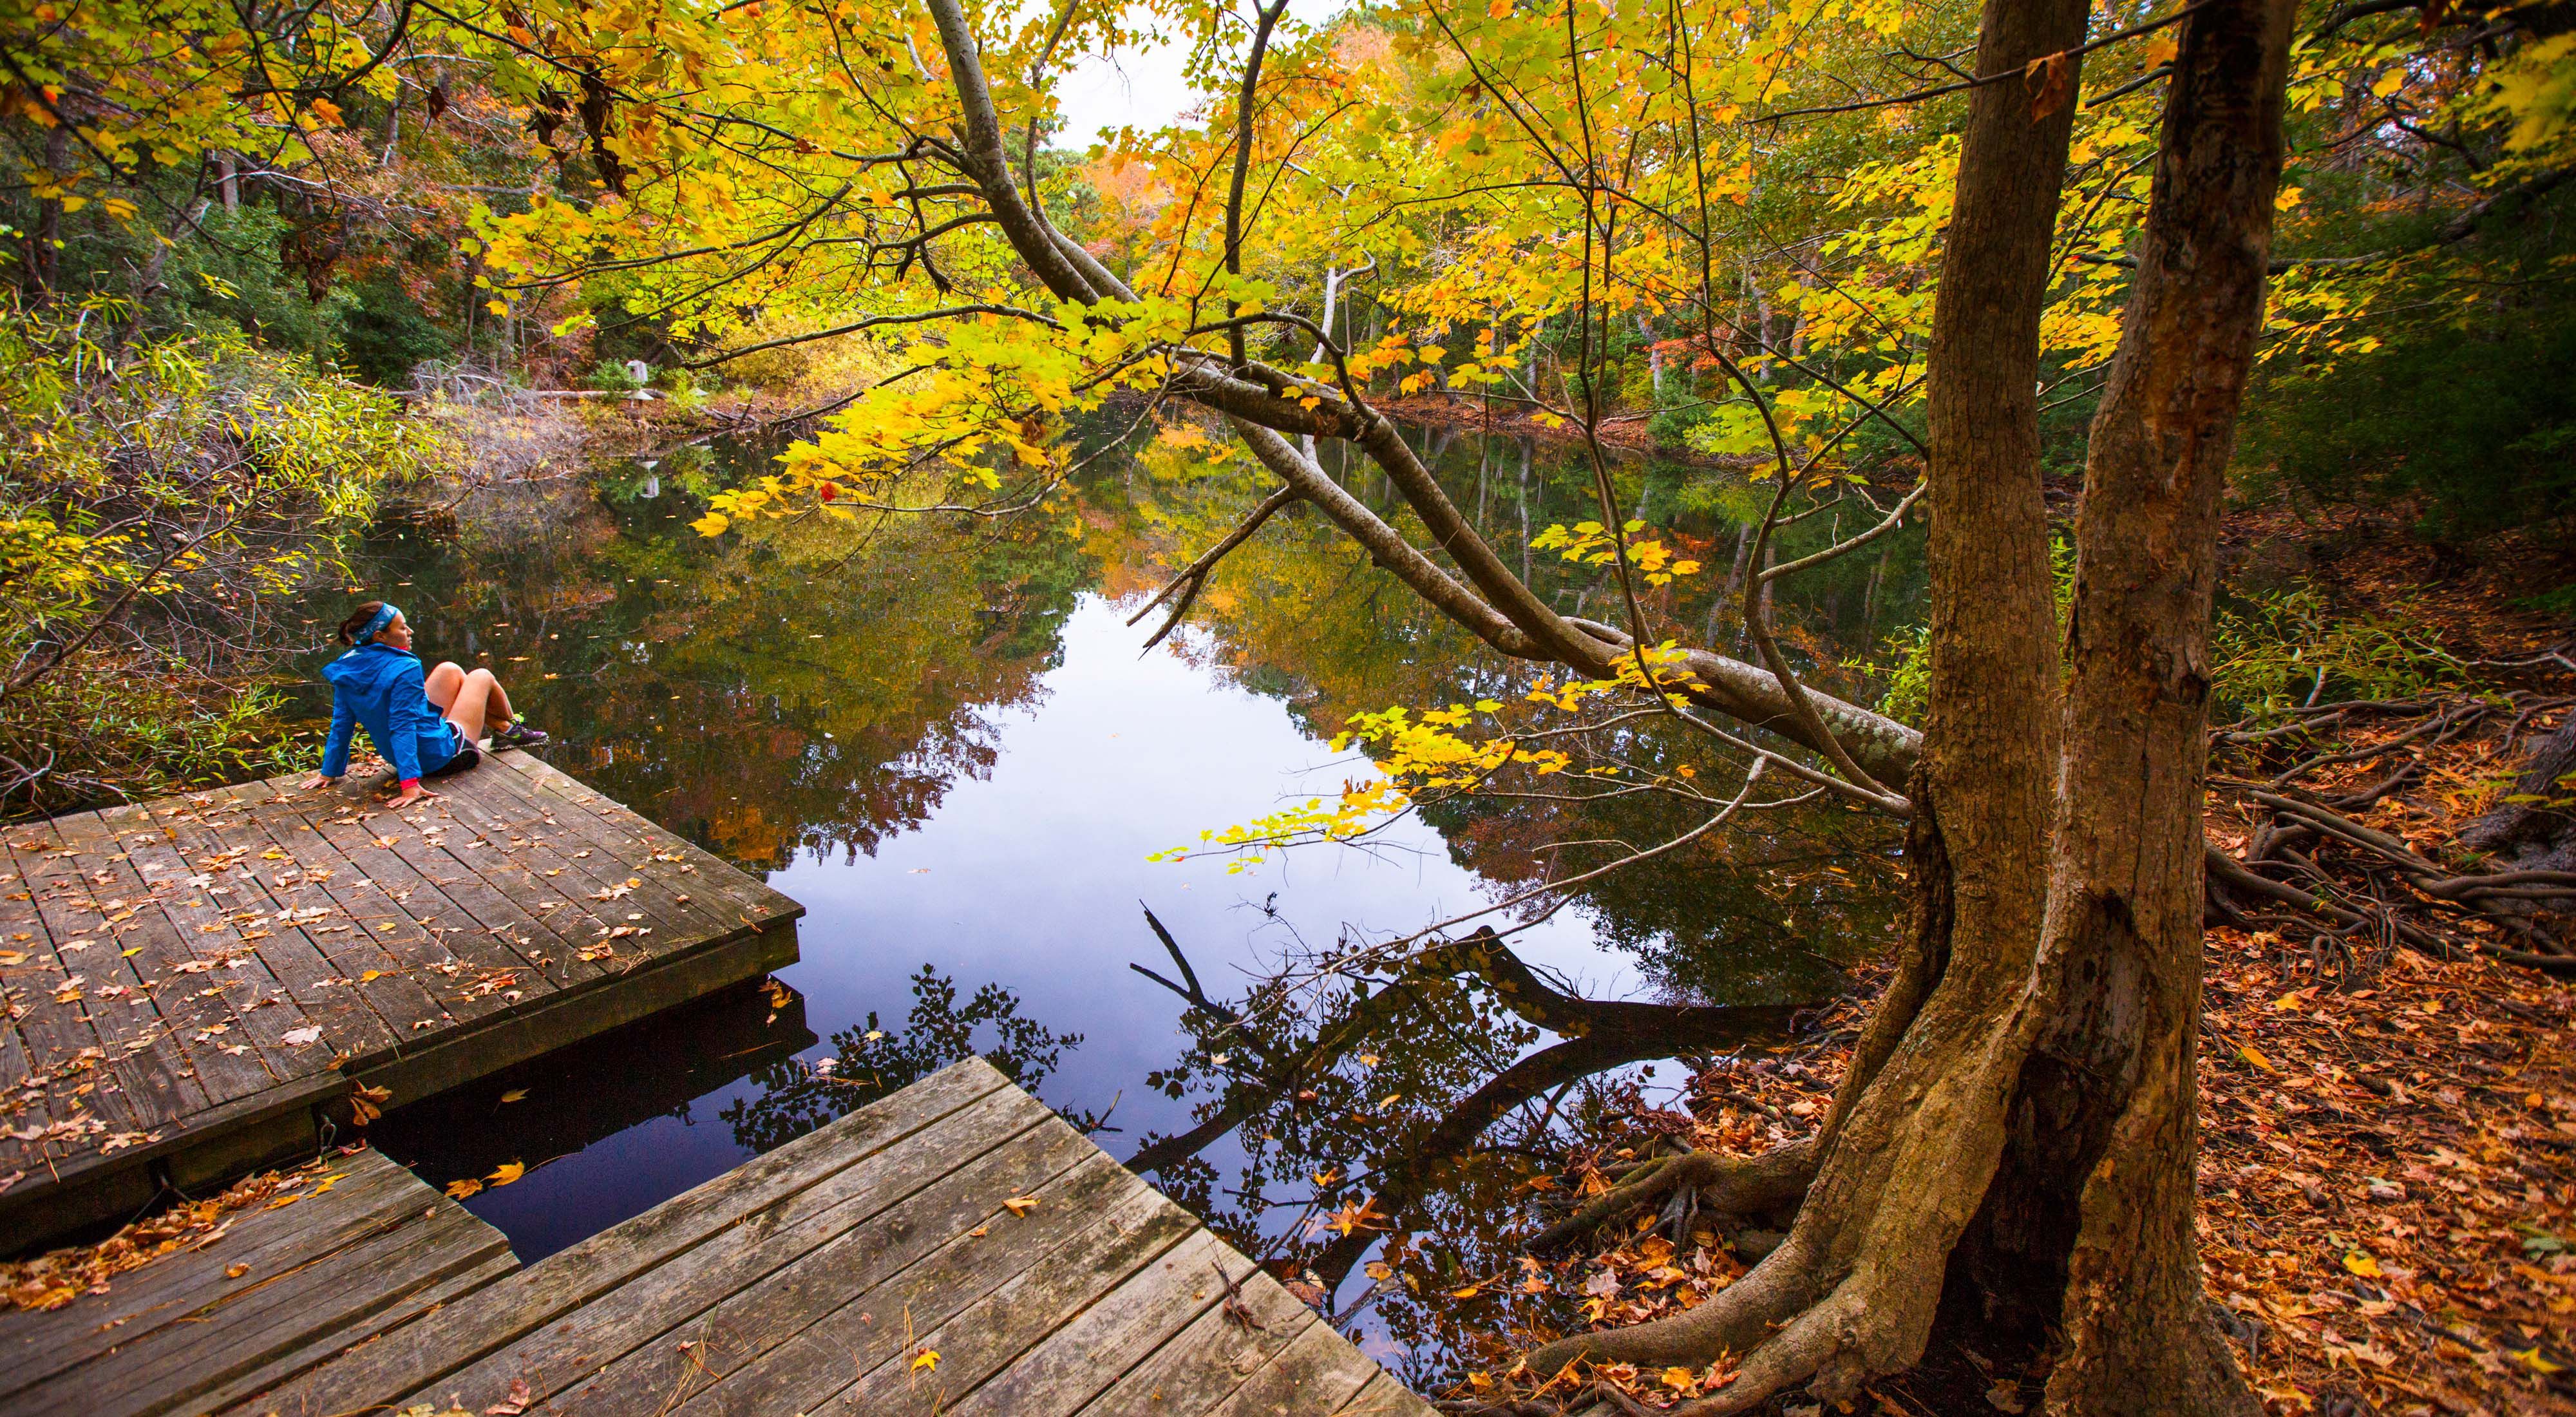 A young woman sits on a pier overlooking a pond, surrounded by trees with fall foliage.